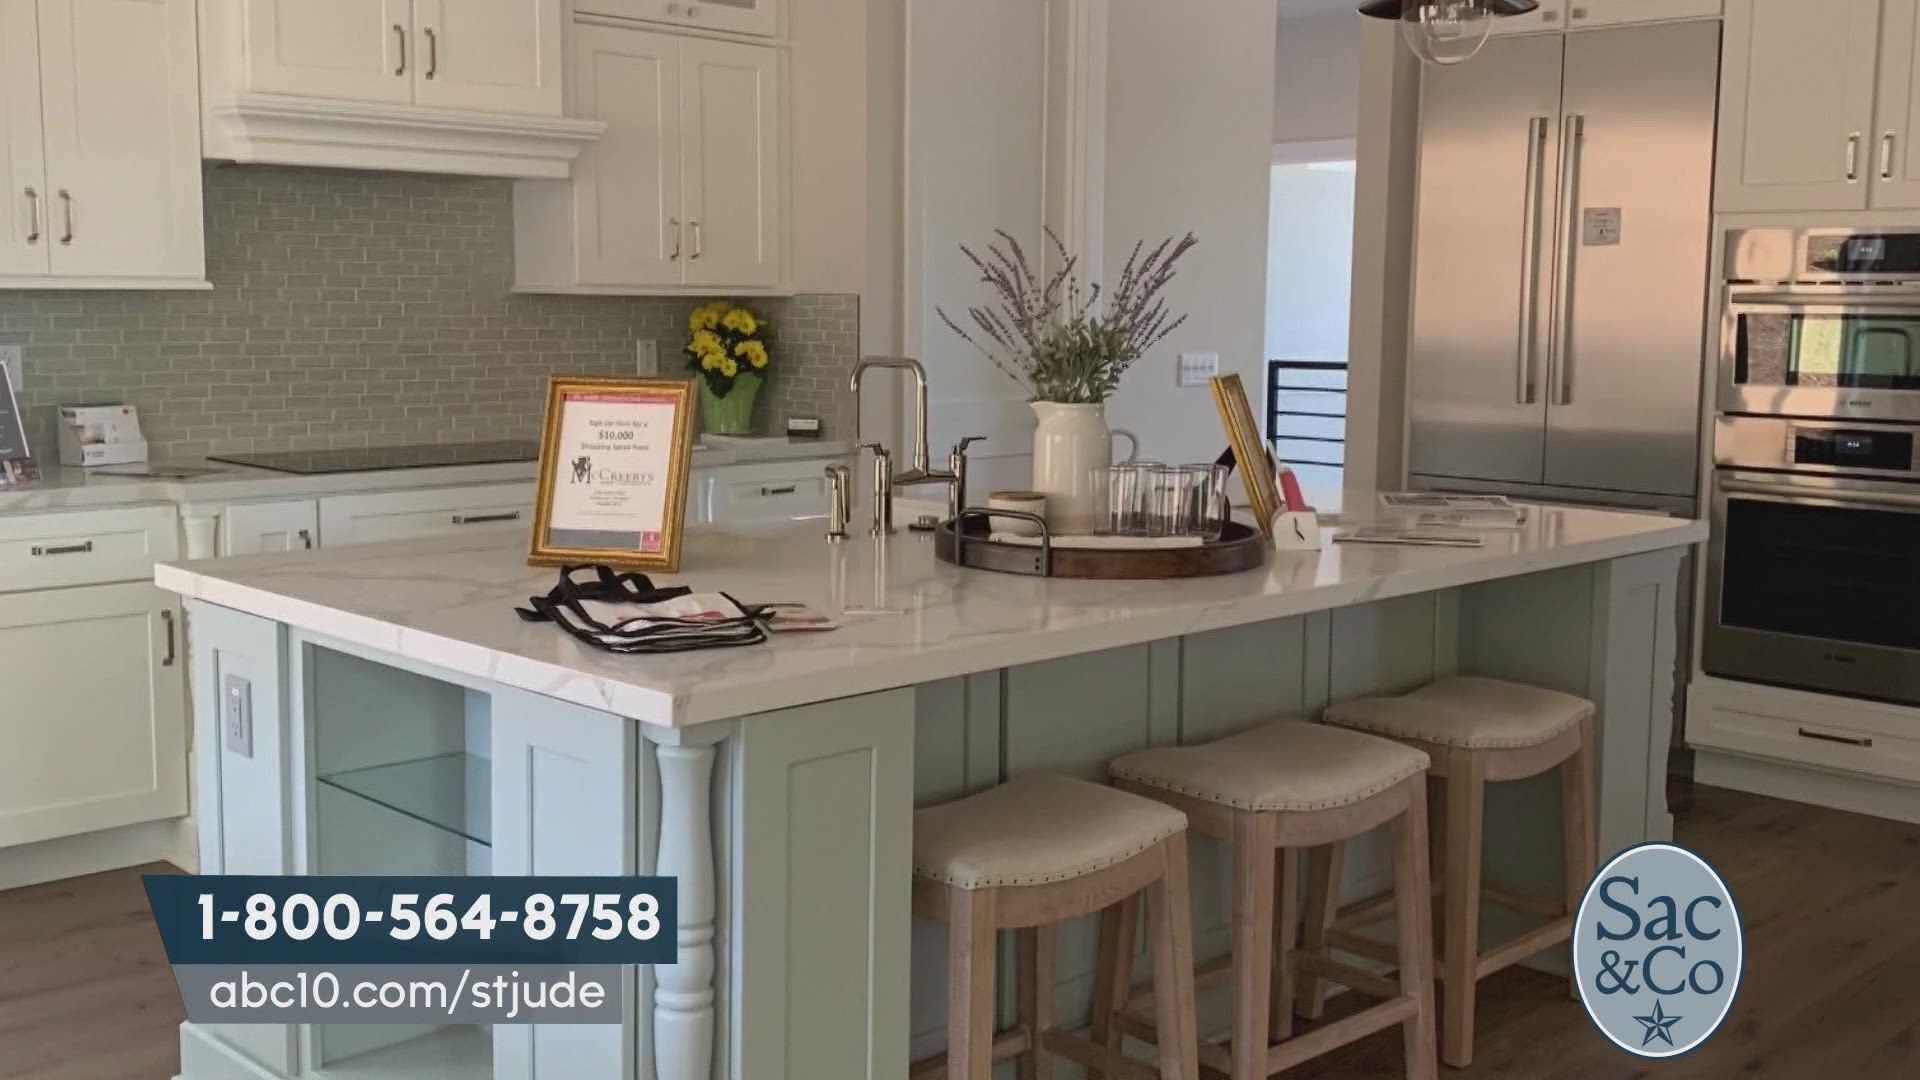 Mellisa Paul chats with Interior Designer Tanna Johns about her passion for design and what inspired her designs for St. Jude’s Dream Home. The following is a paid segment sponsored by St. Jude.